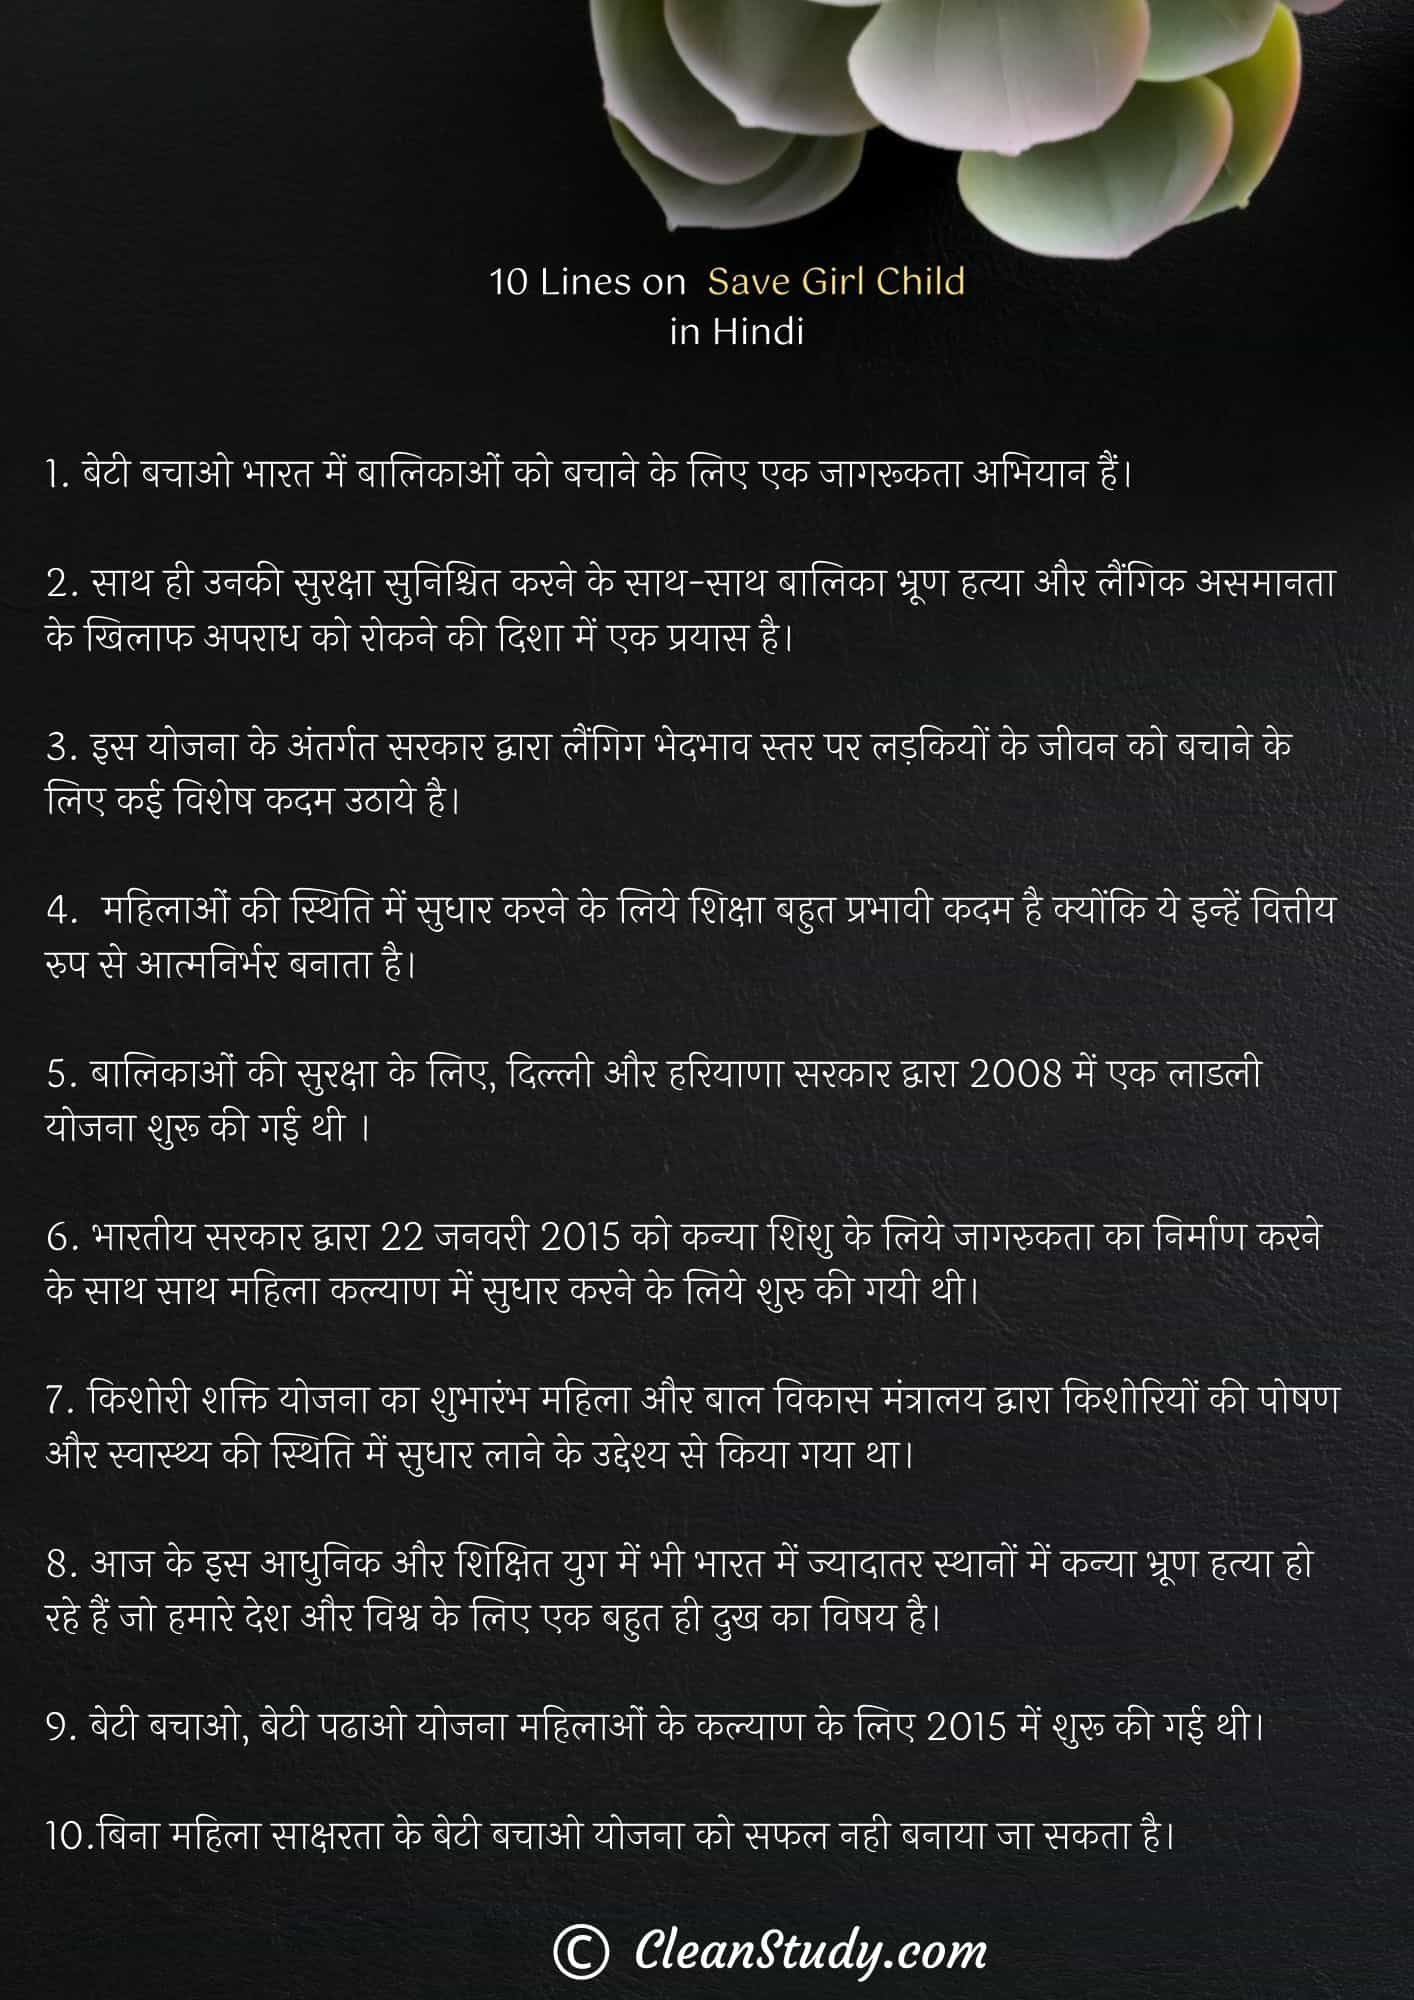 10 Lines on Save Girl Child in Hindi